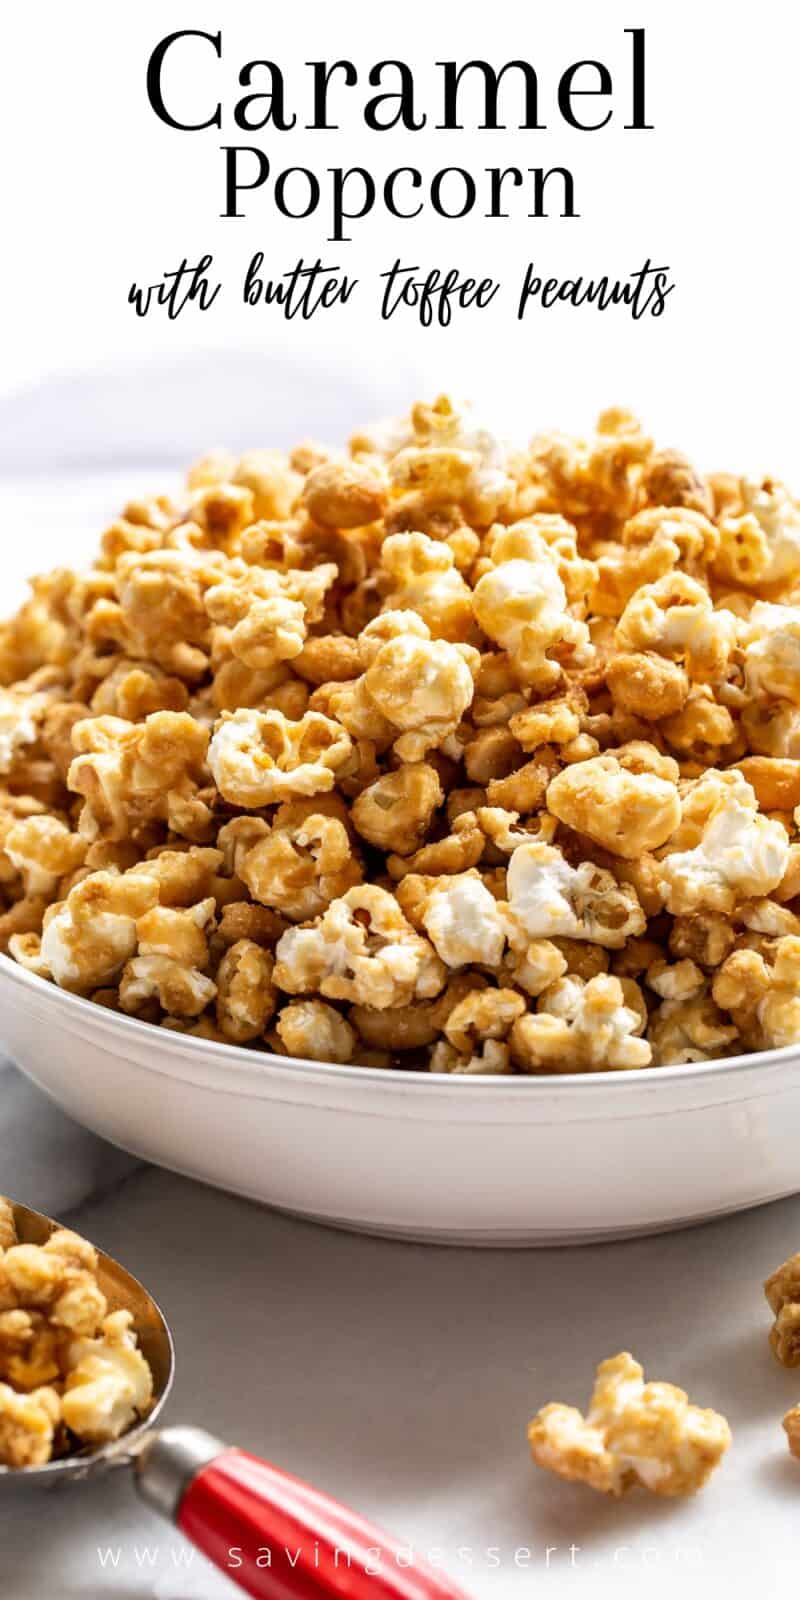 A large bowl of caramel popcorn with a scoop